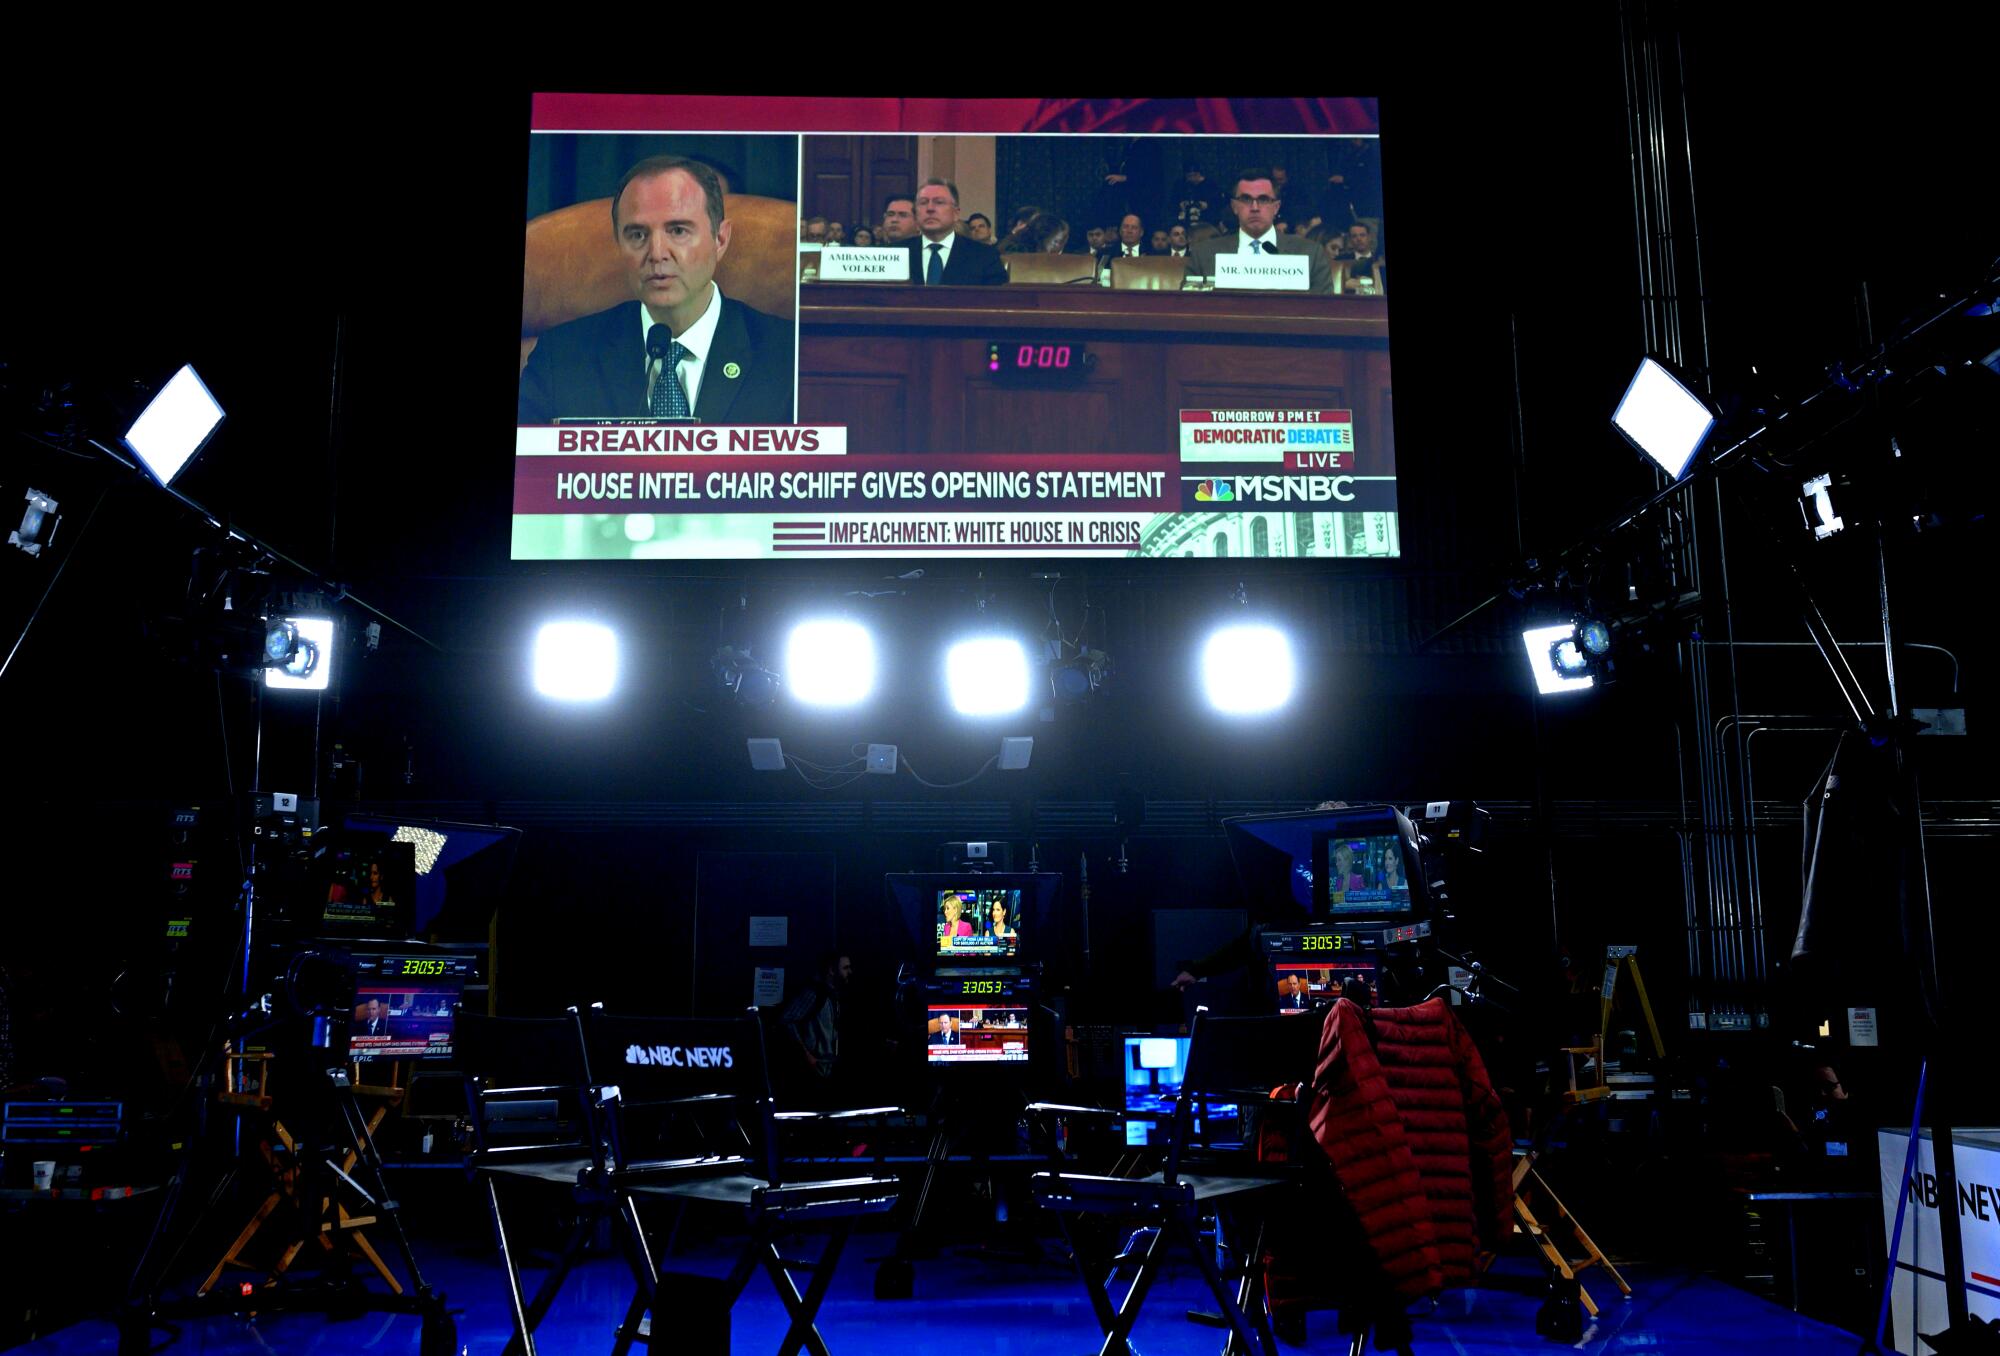 Above stage lights in a dark studio, a large TV reading "breaking news" shows Schiff speaking on a split screen at a hearing